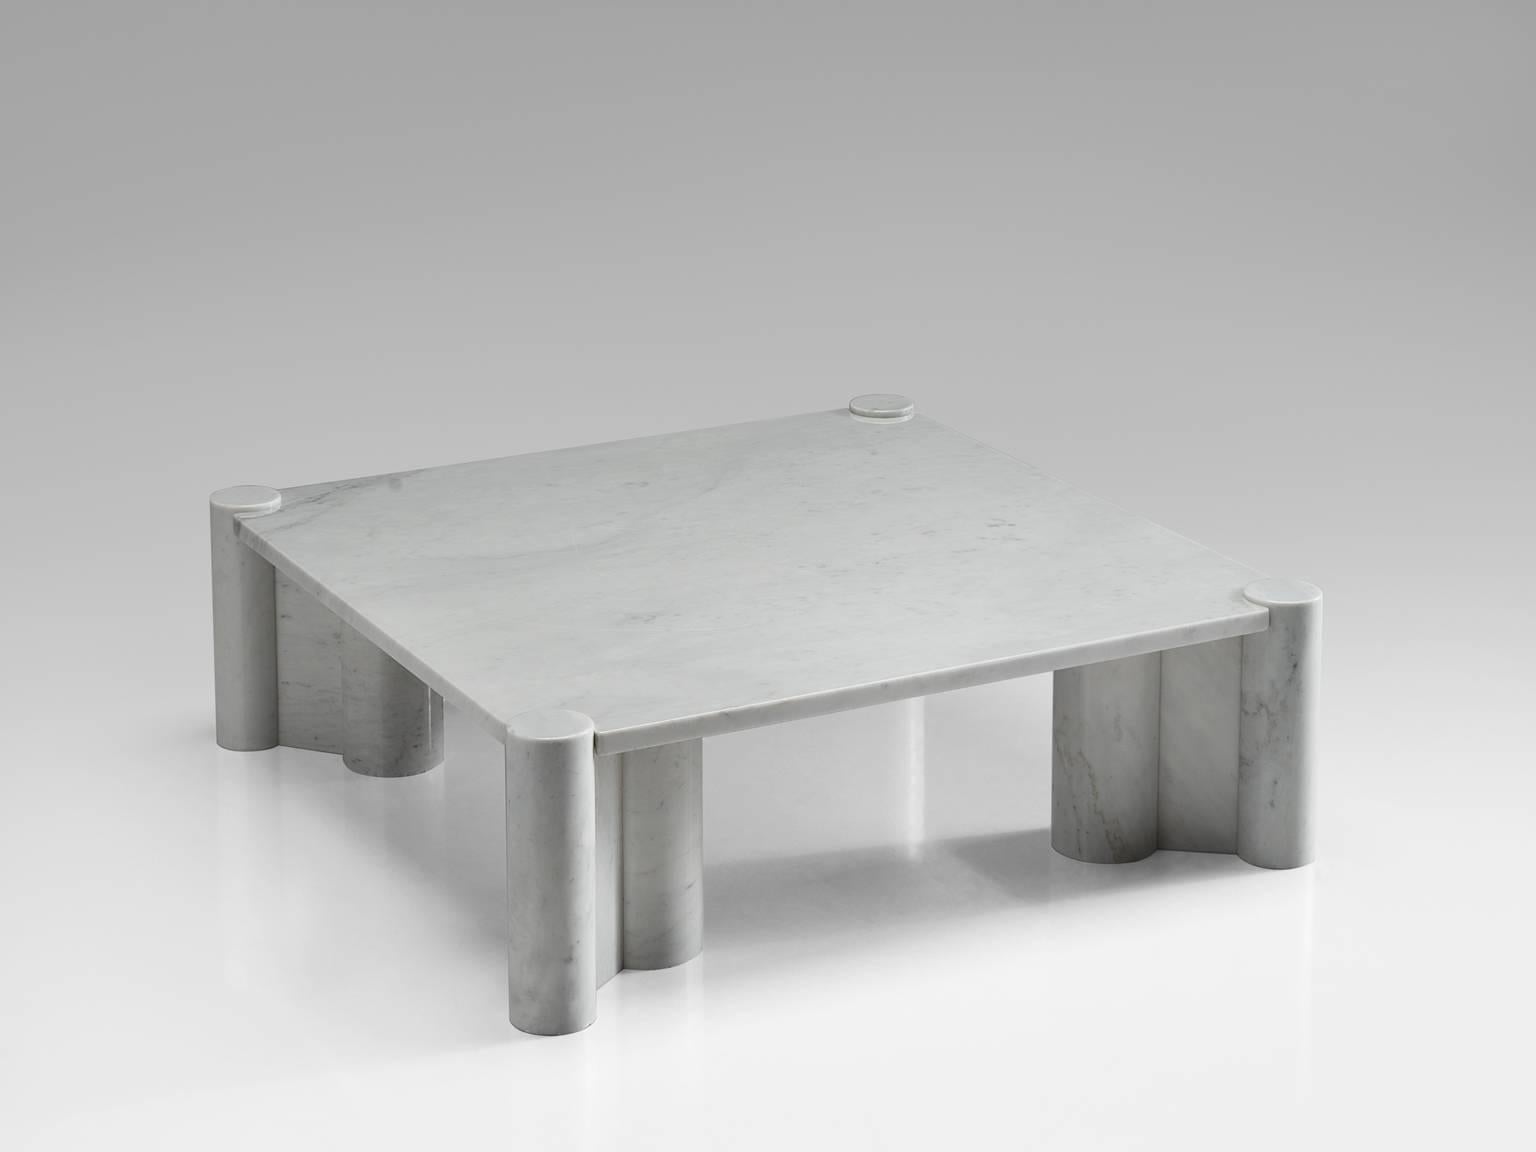 Coffee-table 'Jumbo', in Carrara Marble, designed by Gae Aulenti for Knoll International, United States, 1965. 

Sculptural marble coffee table by Italian architect and designer Gea Aulenti. Square tabletop with four cylindrical cluster legs. This